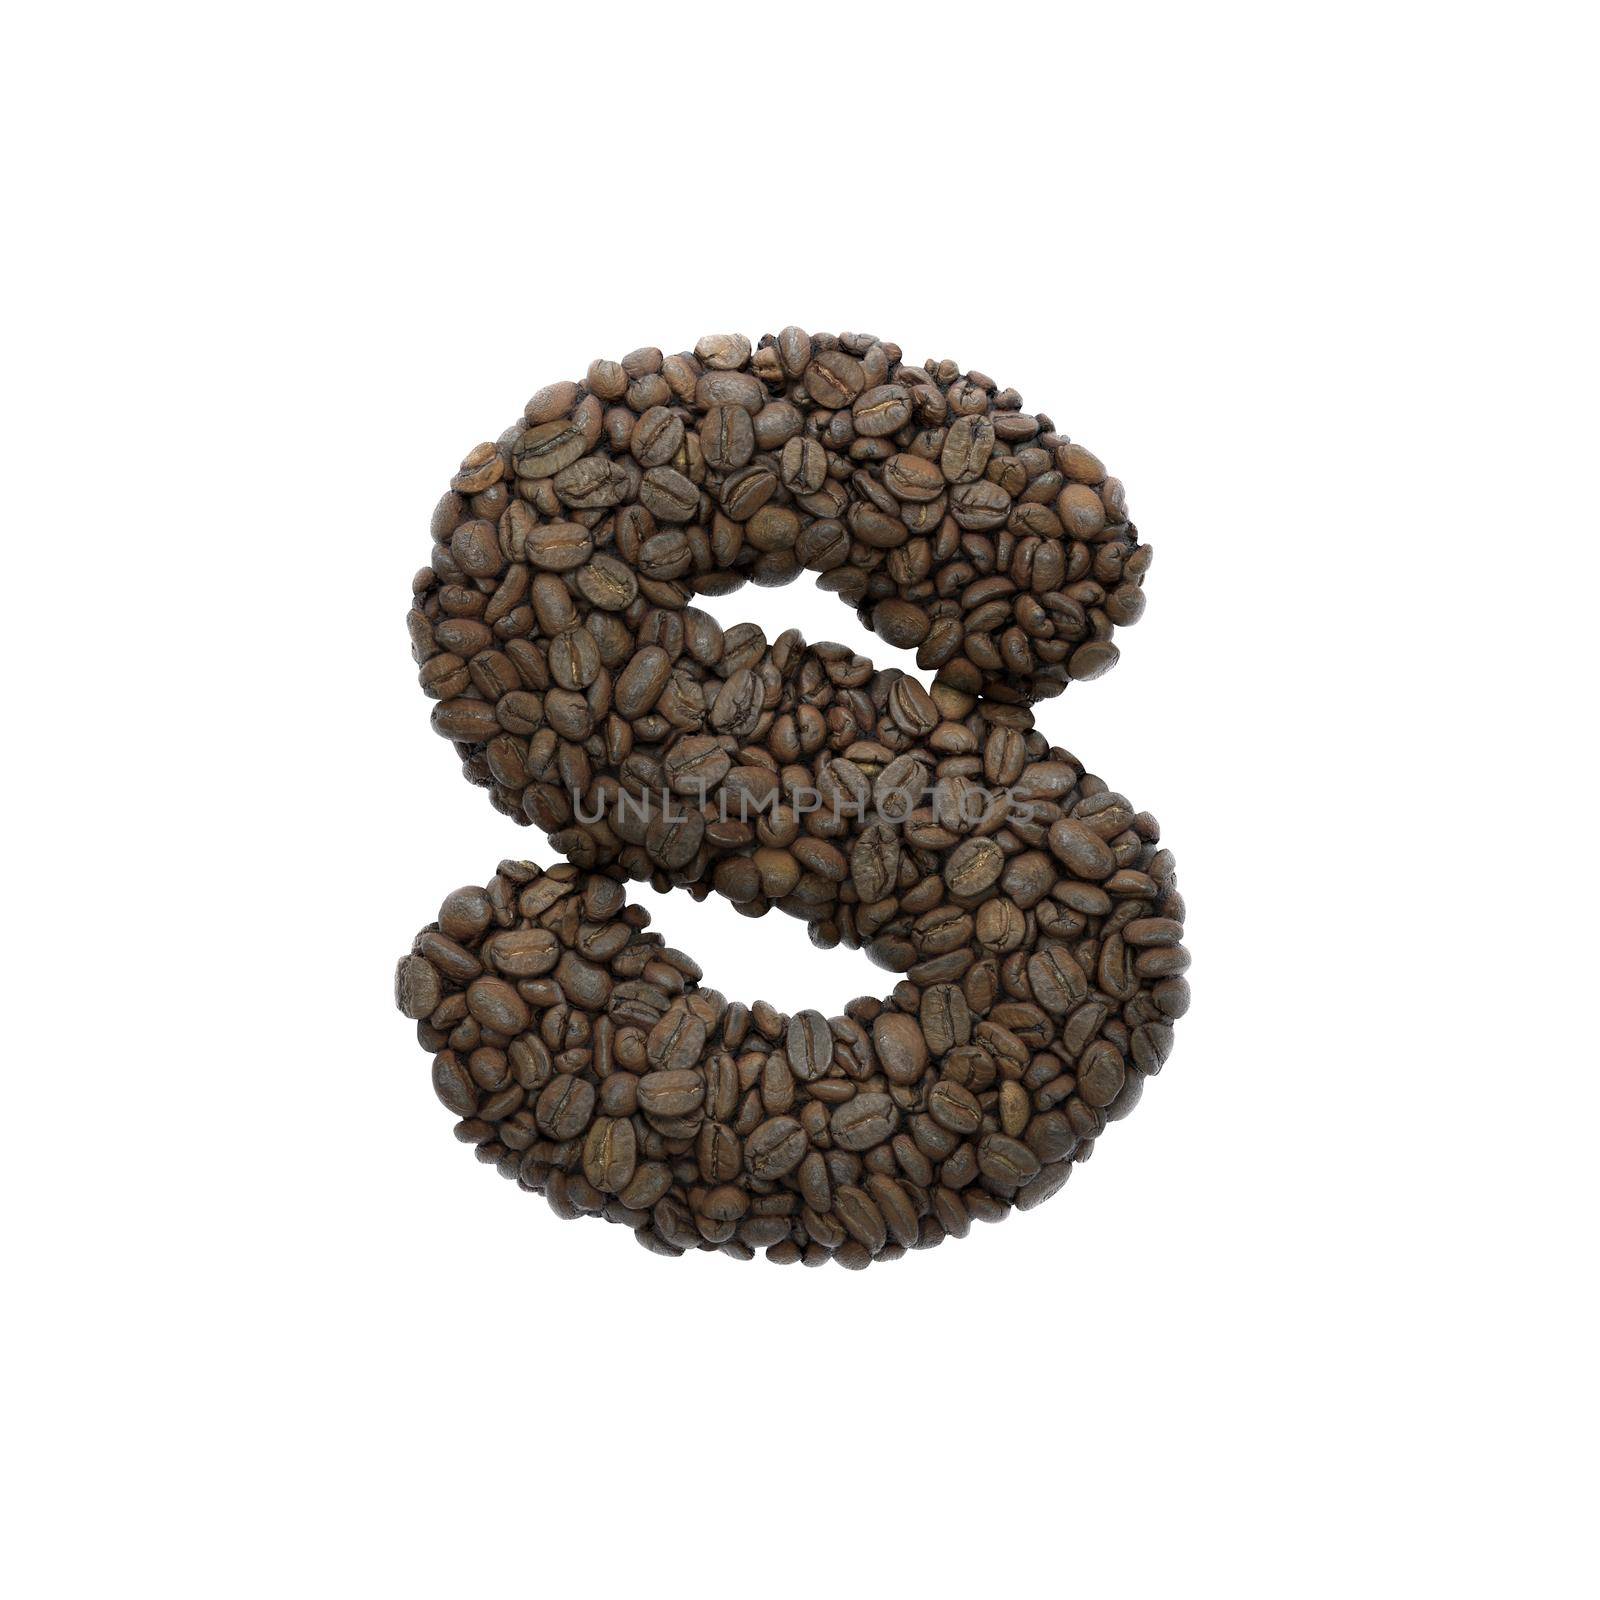 Coffee letter S - Lowercase 3d roasted beans font - Suitable for Coffee, energy or insomnia related subjects by chrisroll